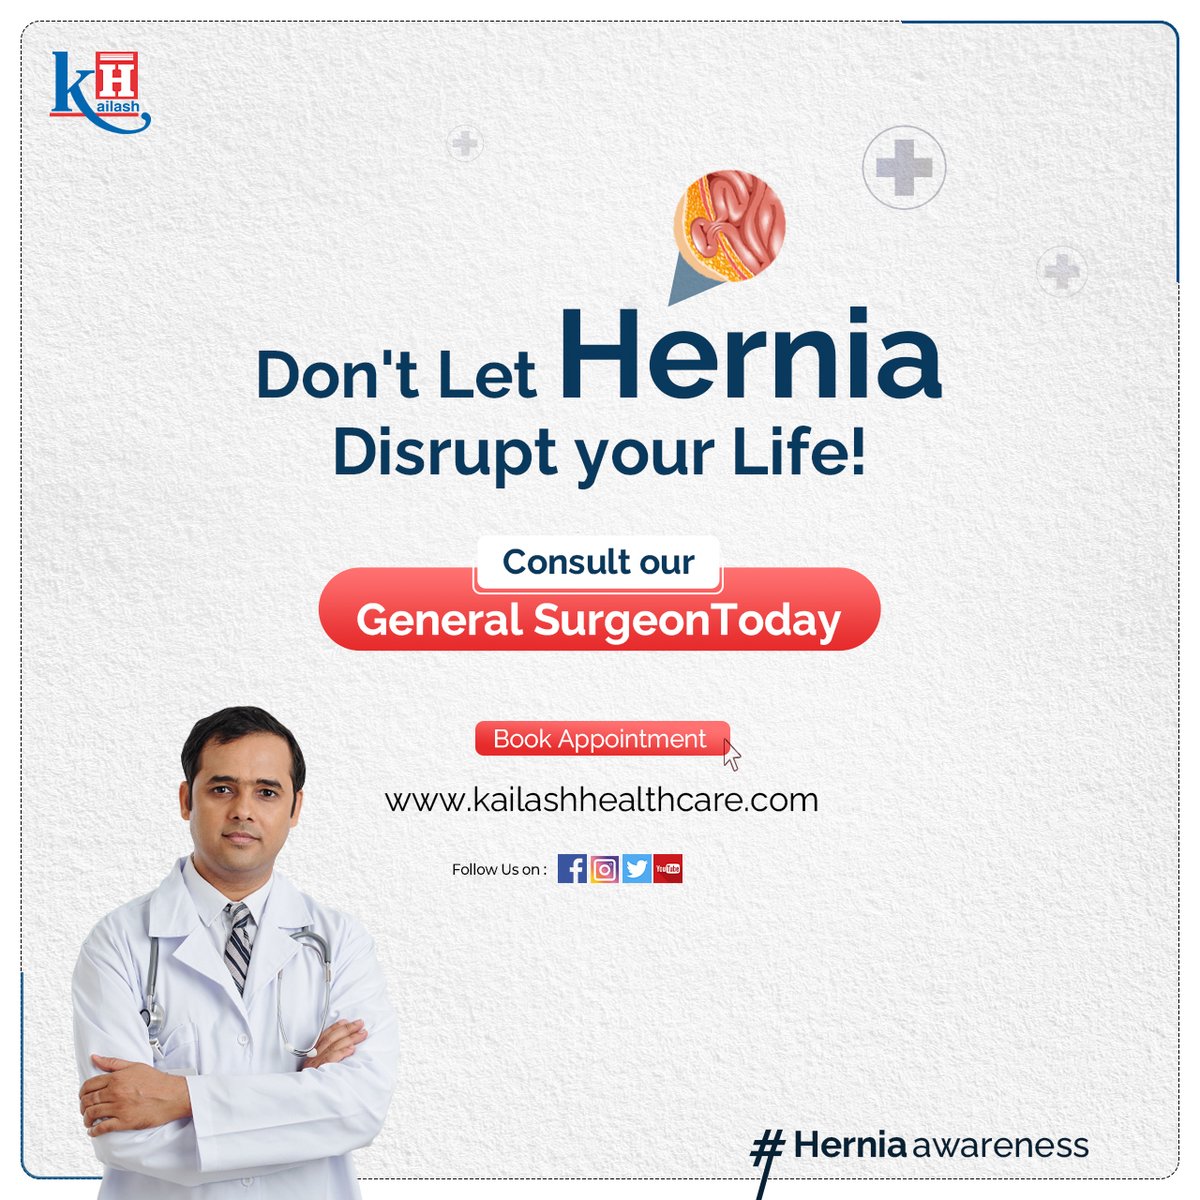 Ever heard of a hernia? It happens when organs push through weak spots in your abdomen. Exercise & healthy weight can help you avoid them! Do not ignore! Consult our Doctors: kailashhealthcare.com #HerniaAwareness #Hernia